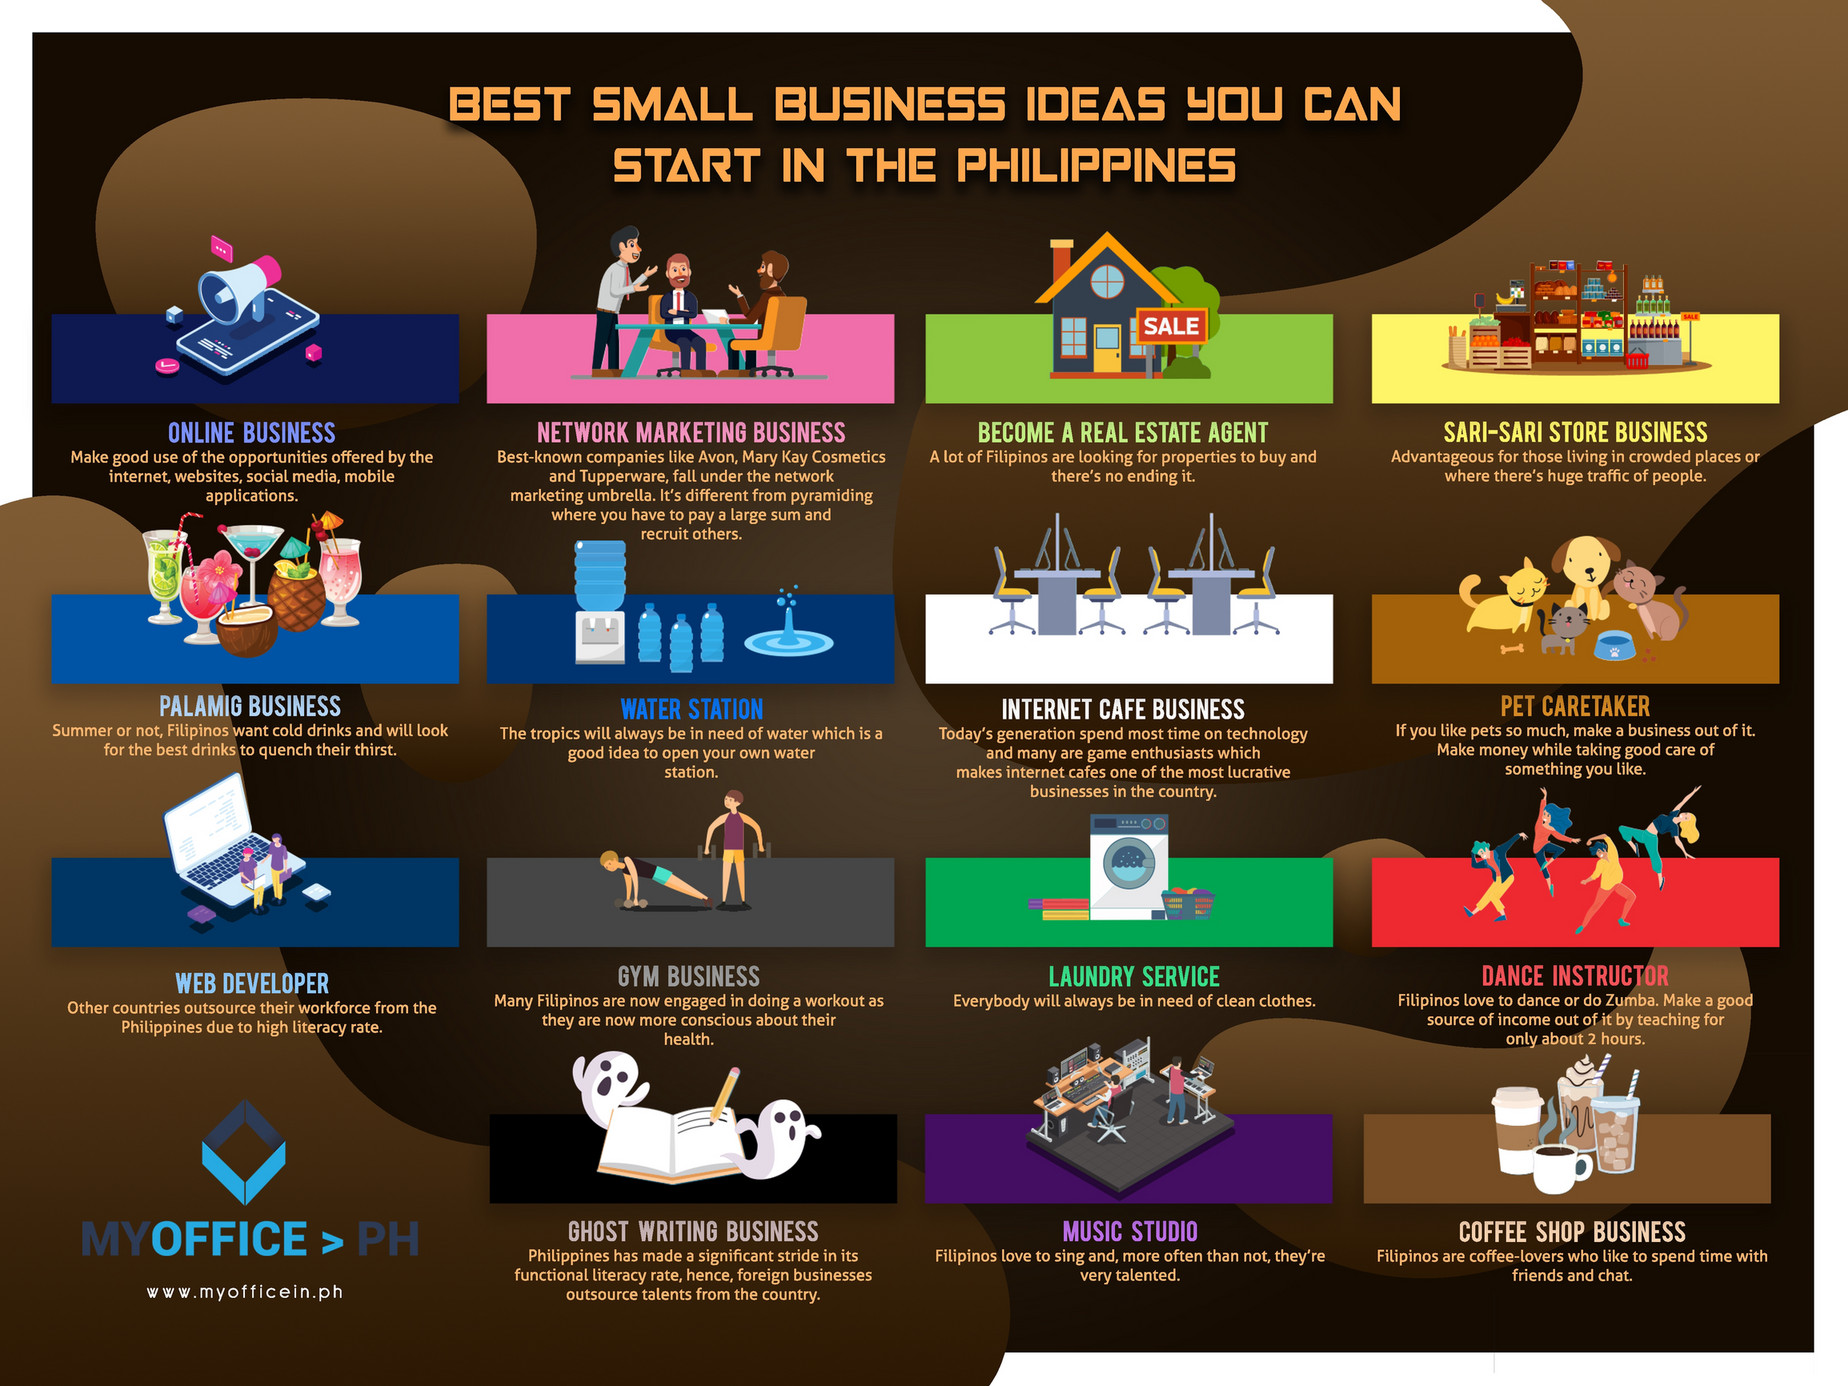 House of IT Best Small Business Ideas You Can Start in the